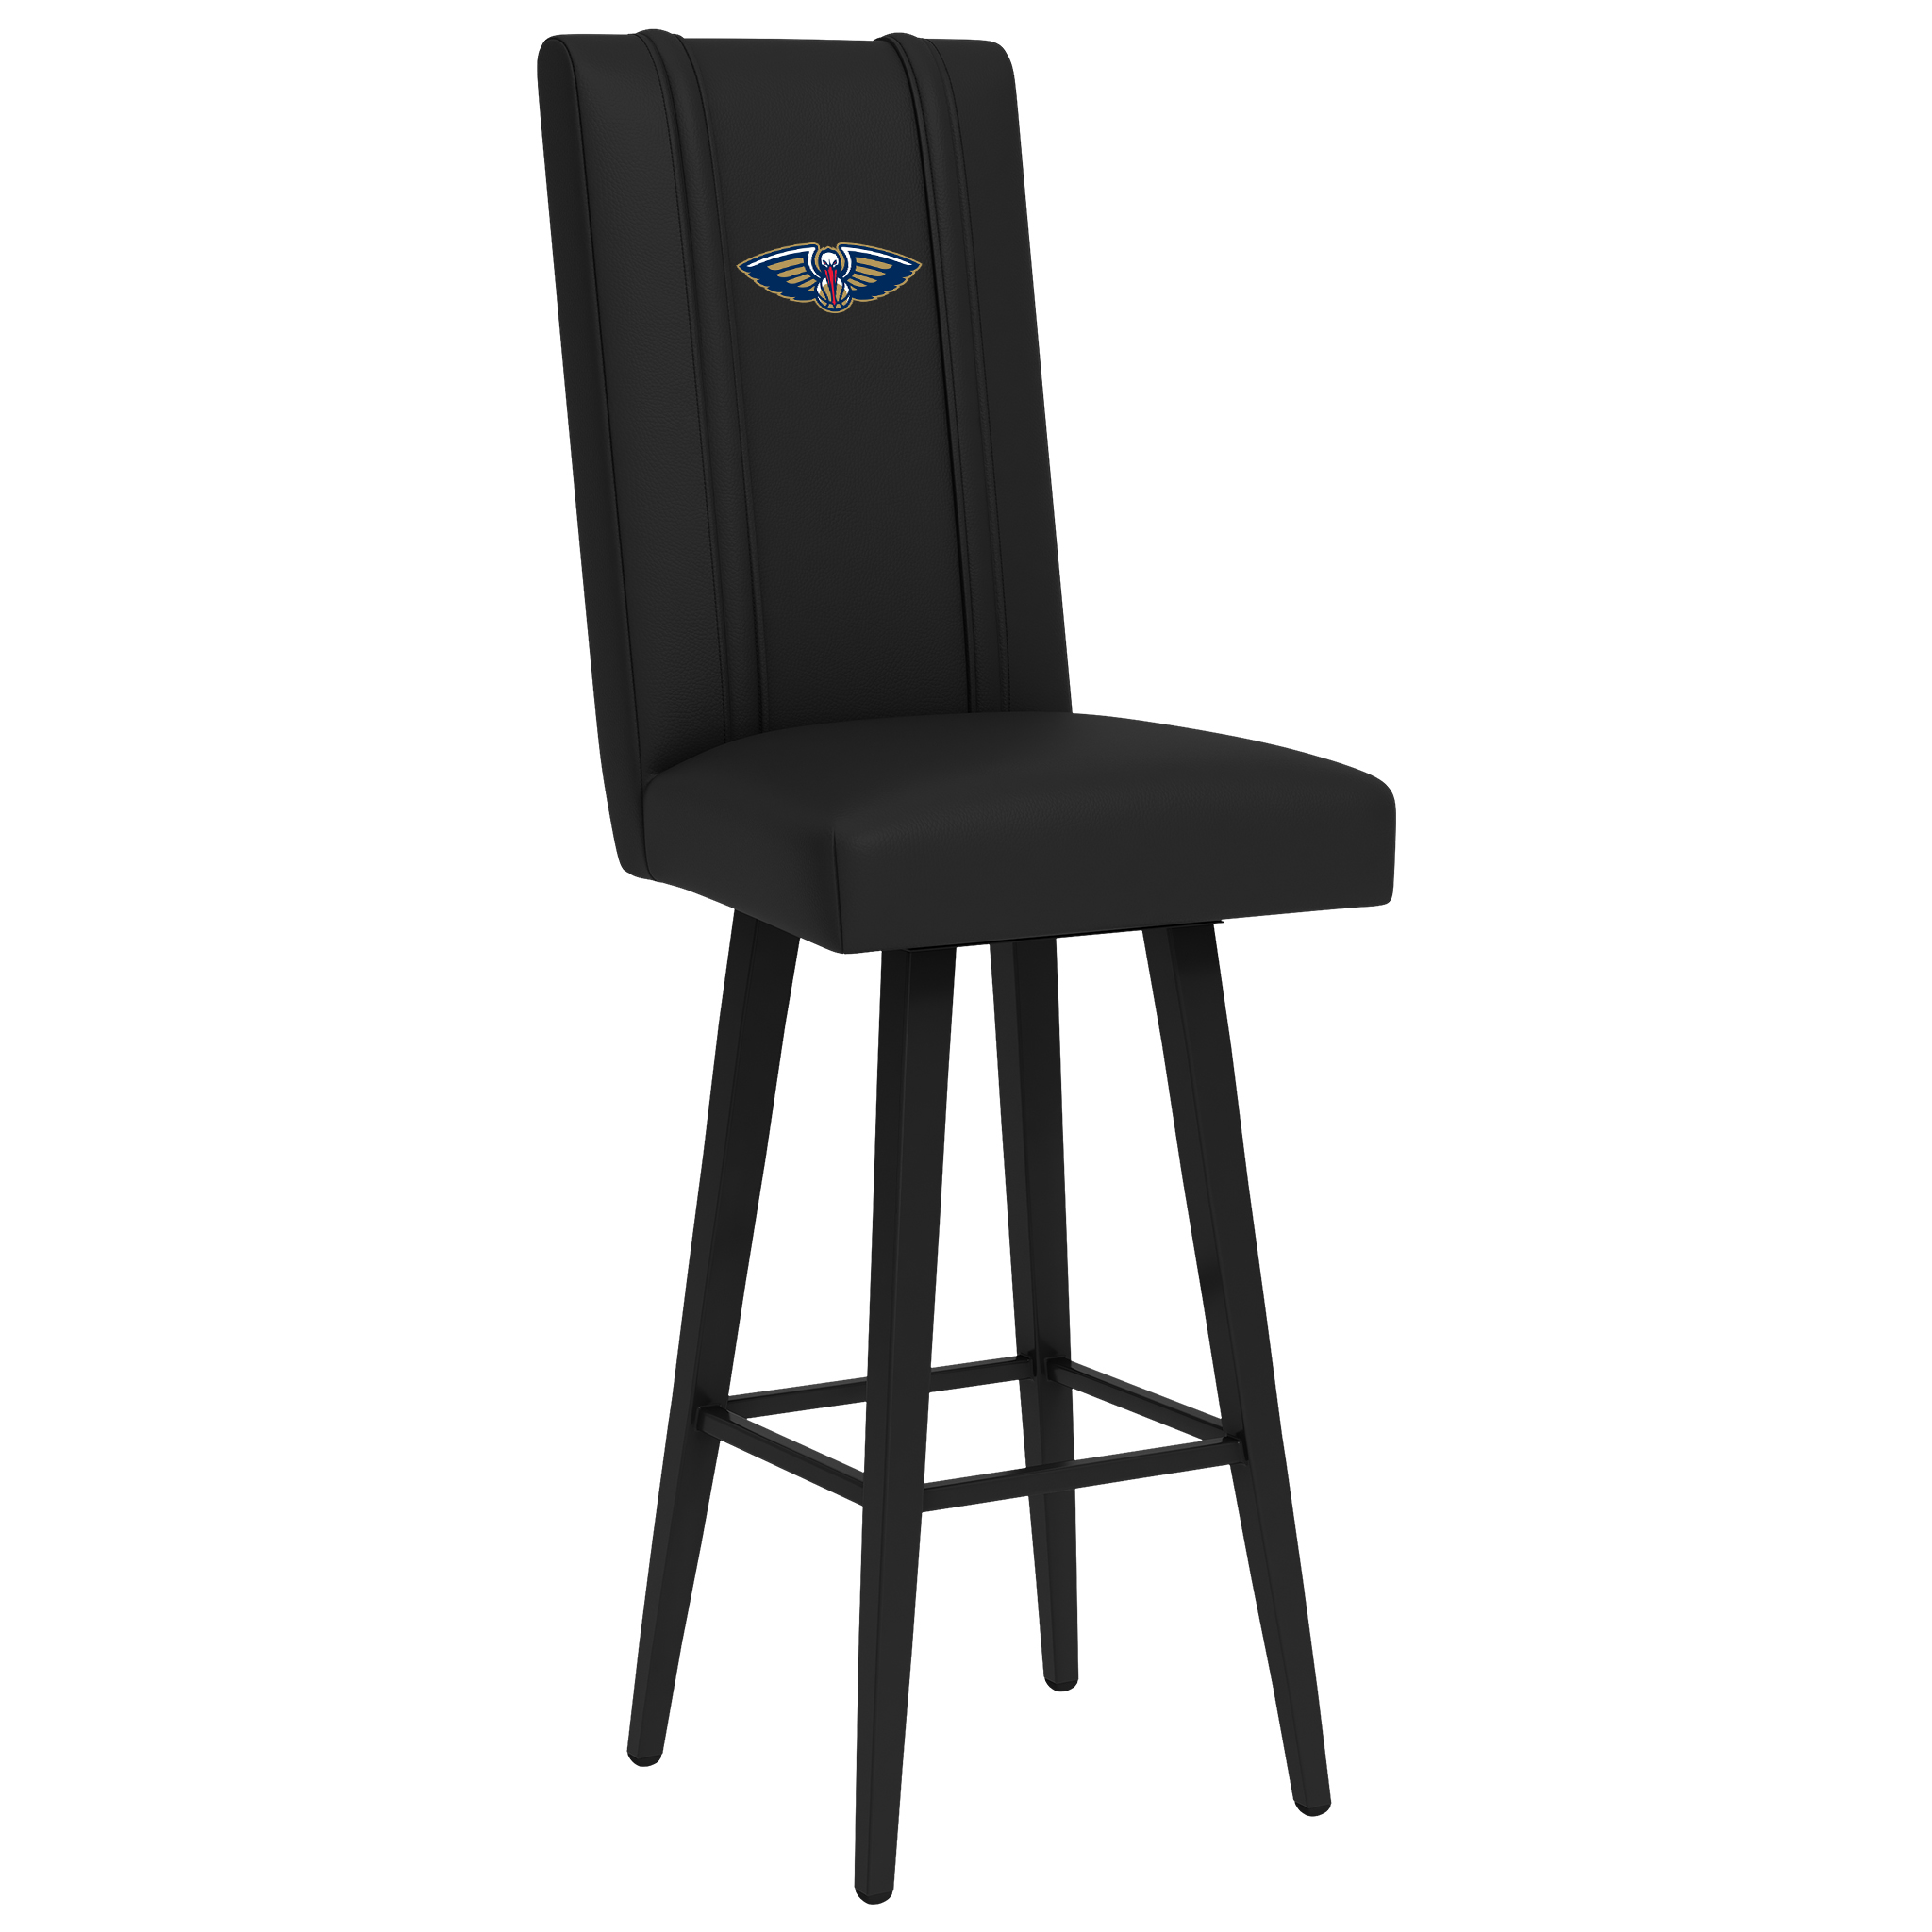 New Orleans Pelicans Swivel Bar Stool 2000 With New Orleans Pelicans Primary Logo